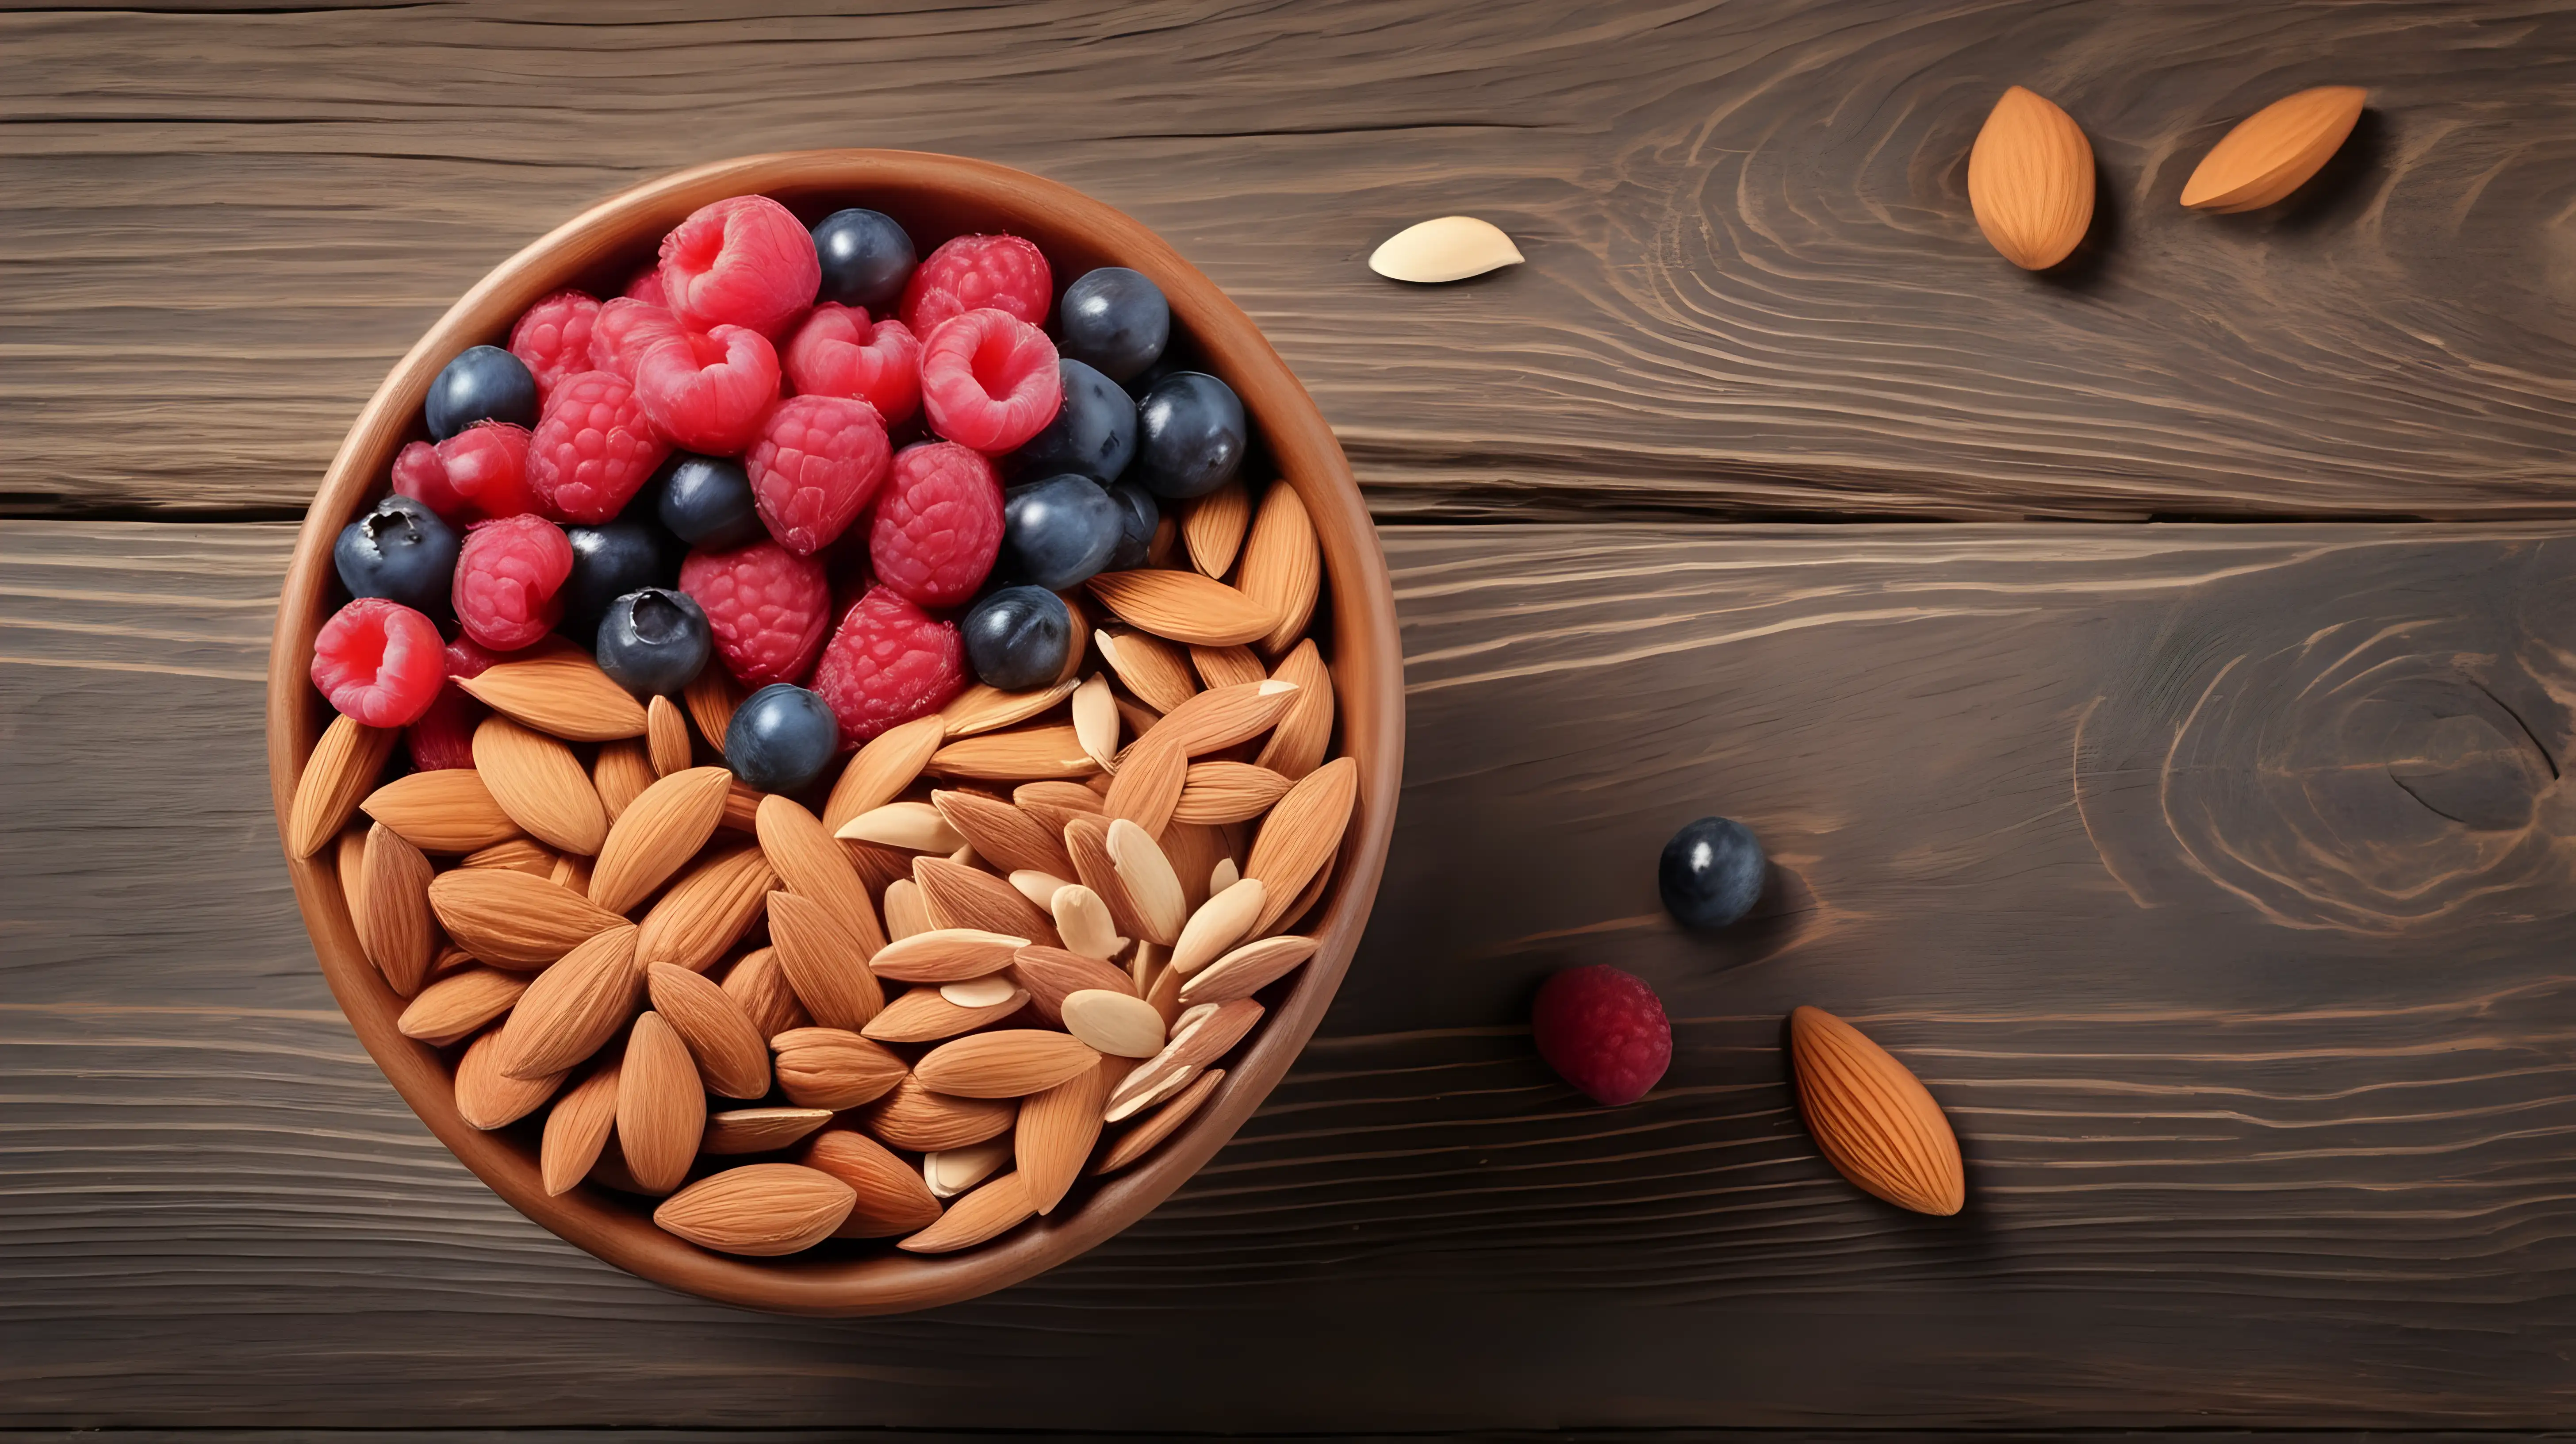 Vibrant Berry and Almond Grains Display on Rustic Wooden Background